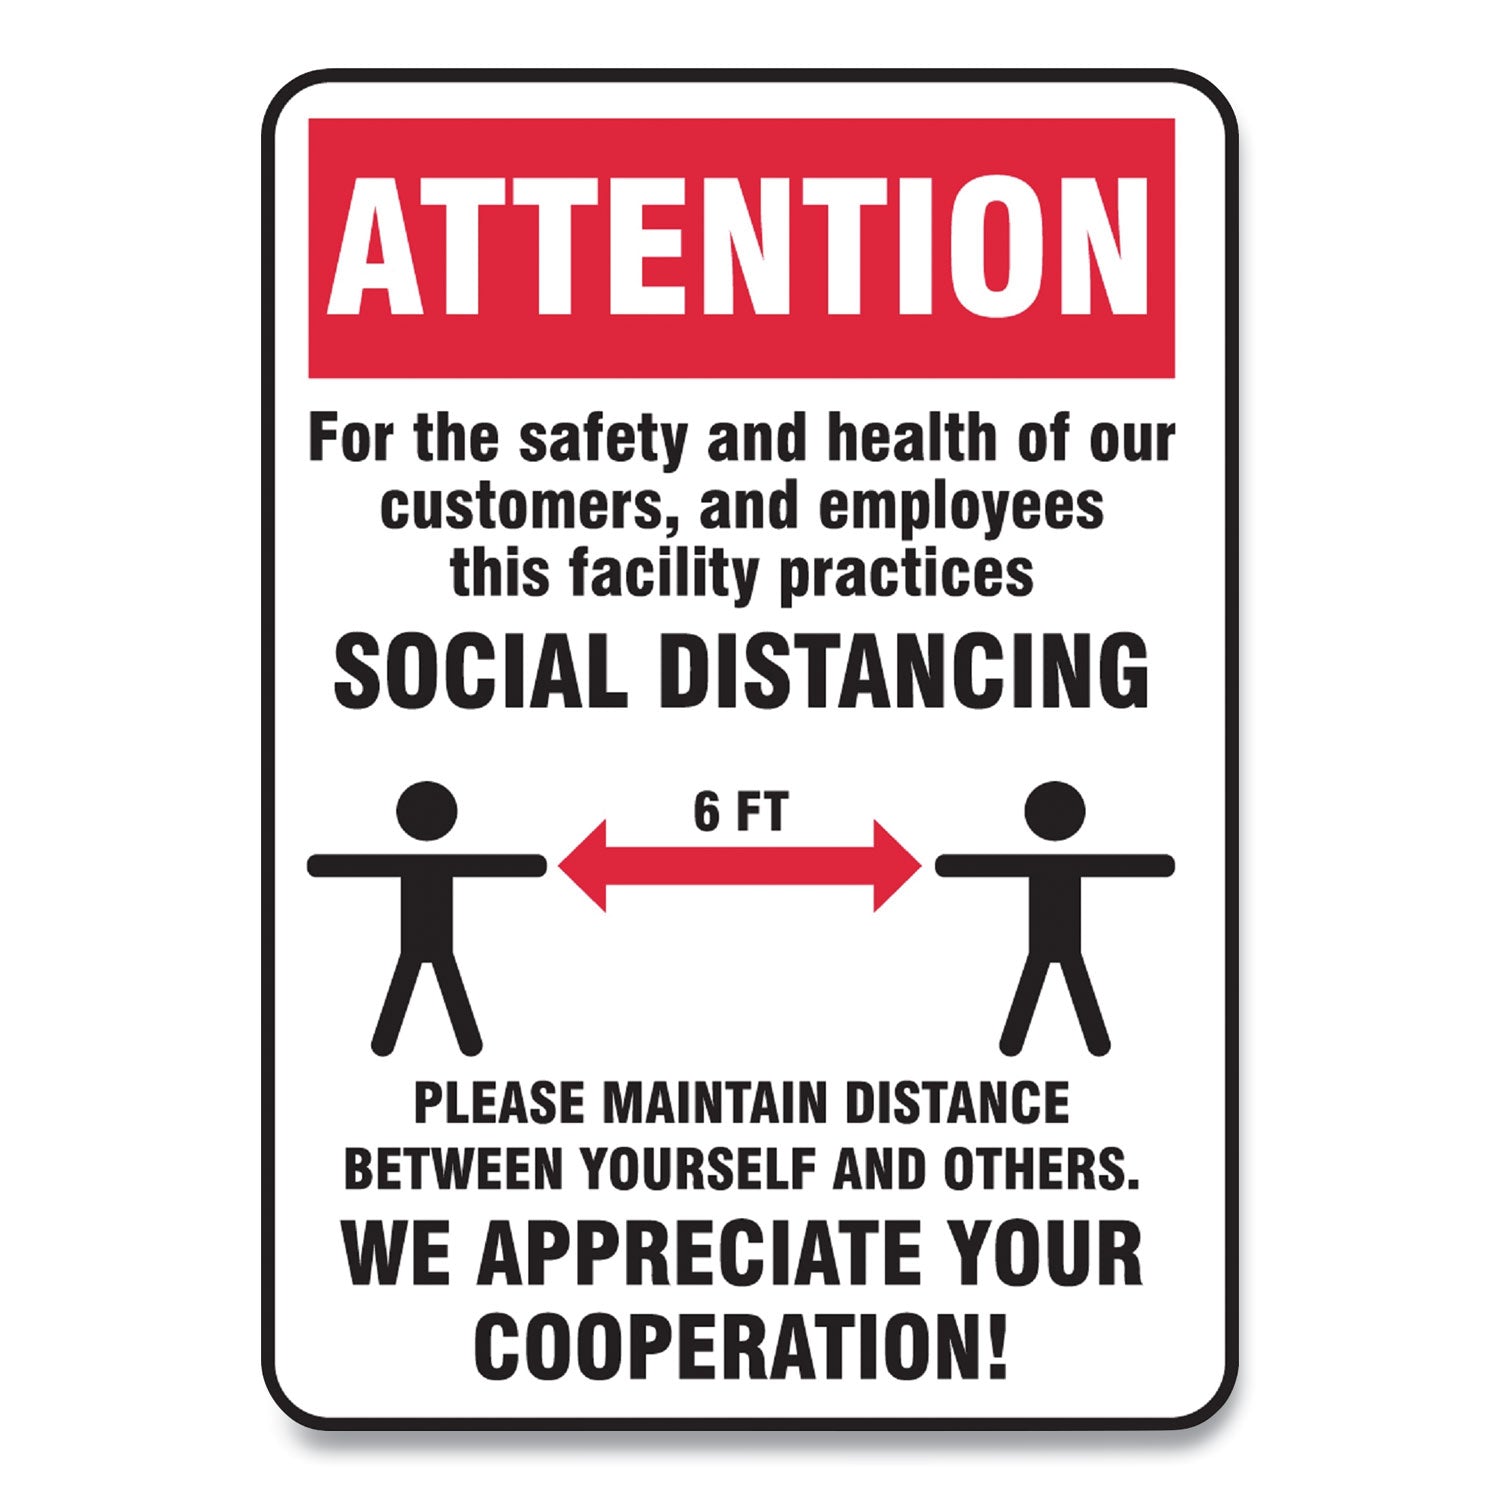 social-distance-signs-wall-10-x-14-customers-and-employees-distancing-humans-arrows-red-white-10-pack_gn1mgng905vpesp - 1